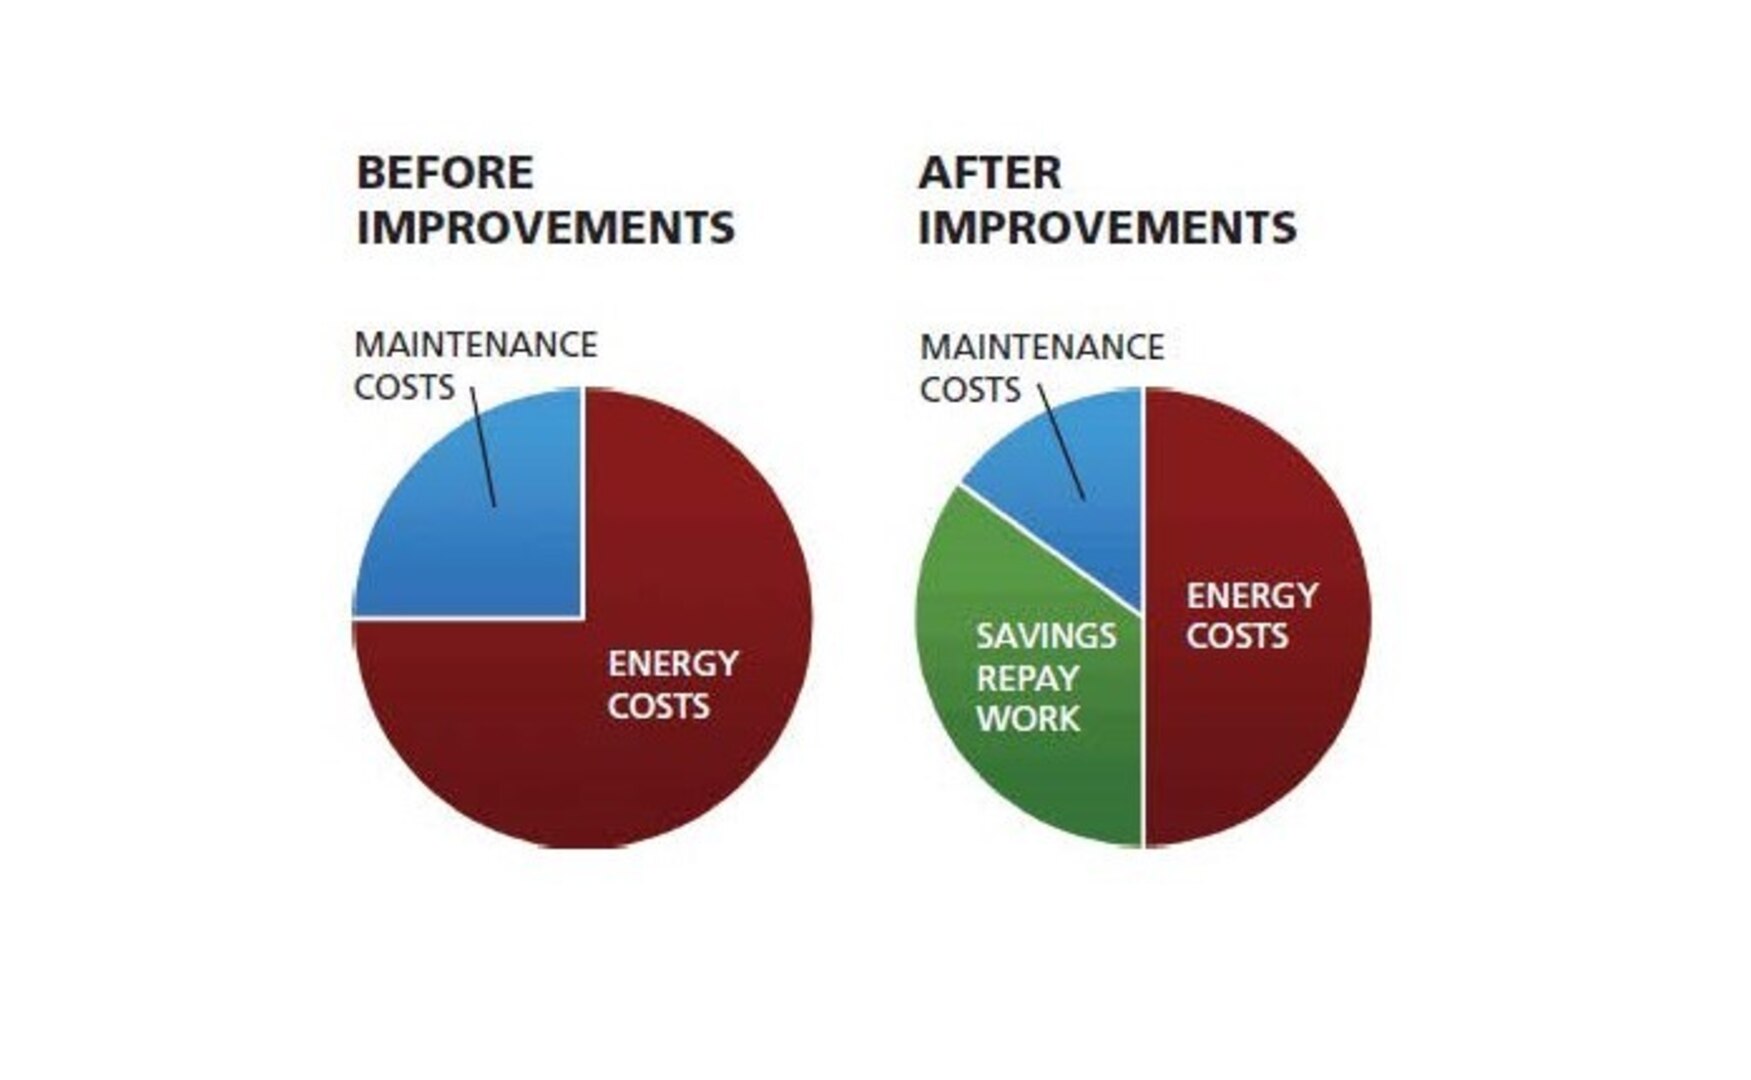 Energy savings performance contracts enable the Air Force to improve energy performance while addressing aging infrastructure concerns and reducing consumption, through a budget-neutral approach. (Courtesy graphic)